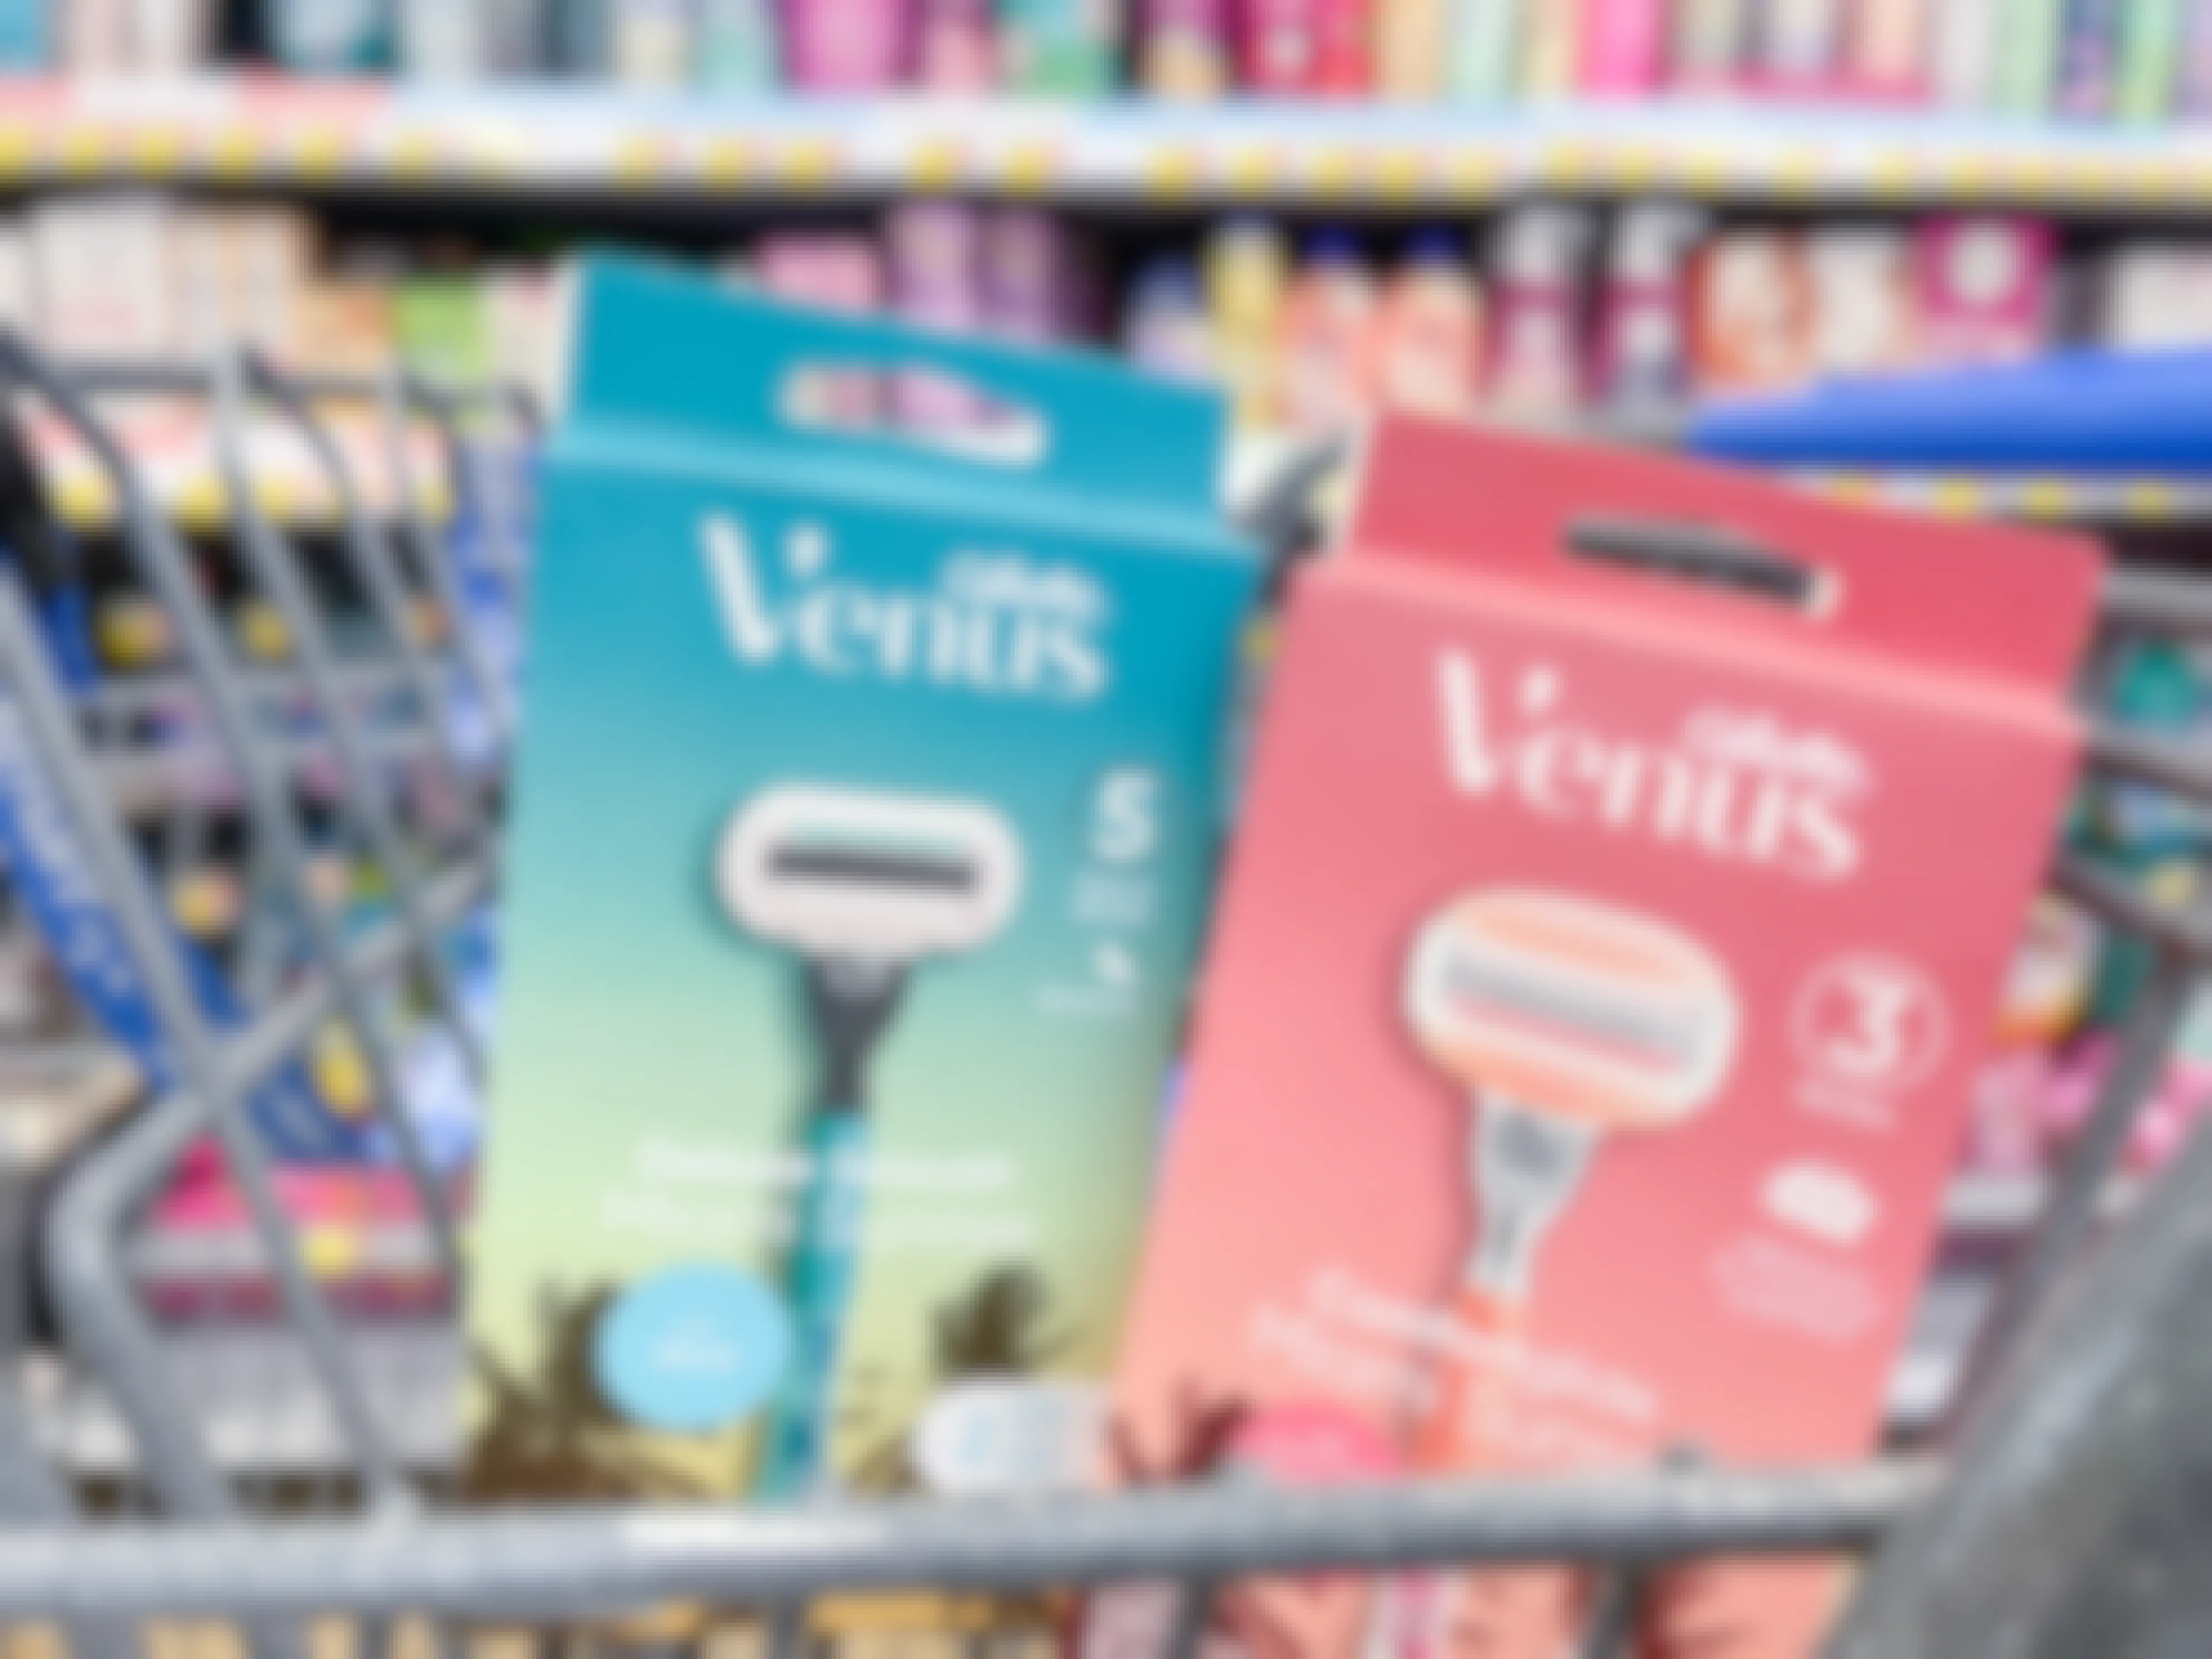 A box of Venus Miami Sunset and Venus Miami sunrise razors sitting in the front of a shopping cart.